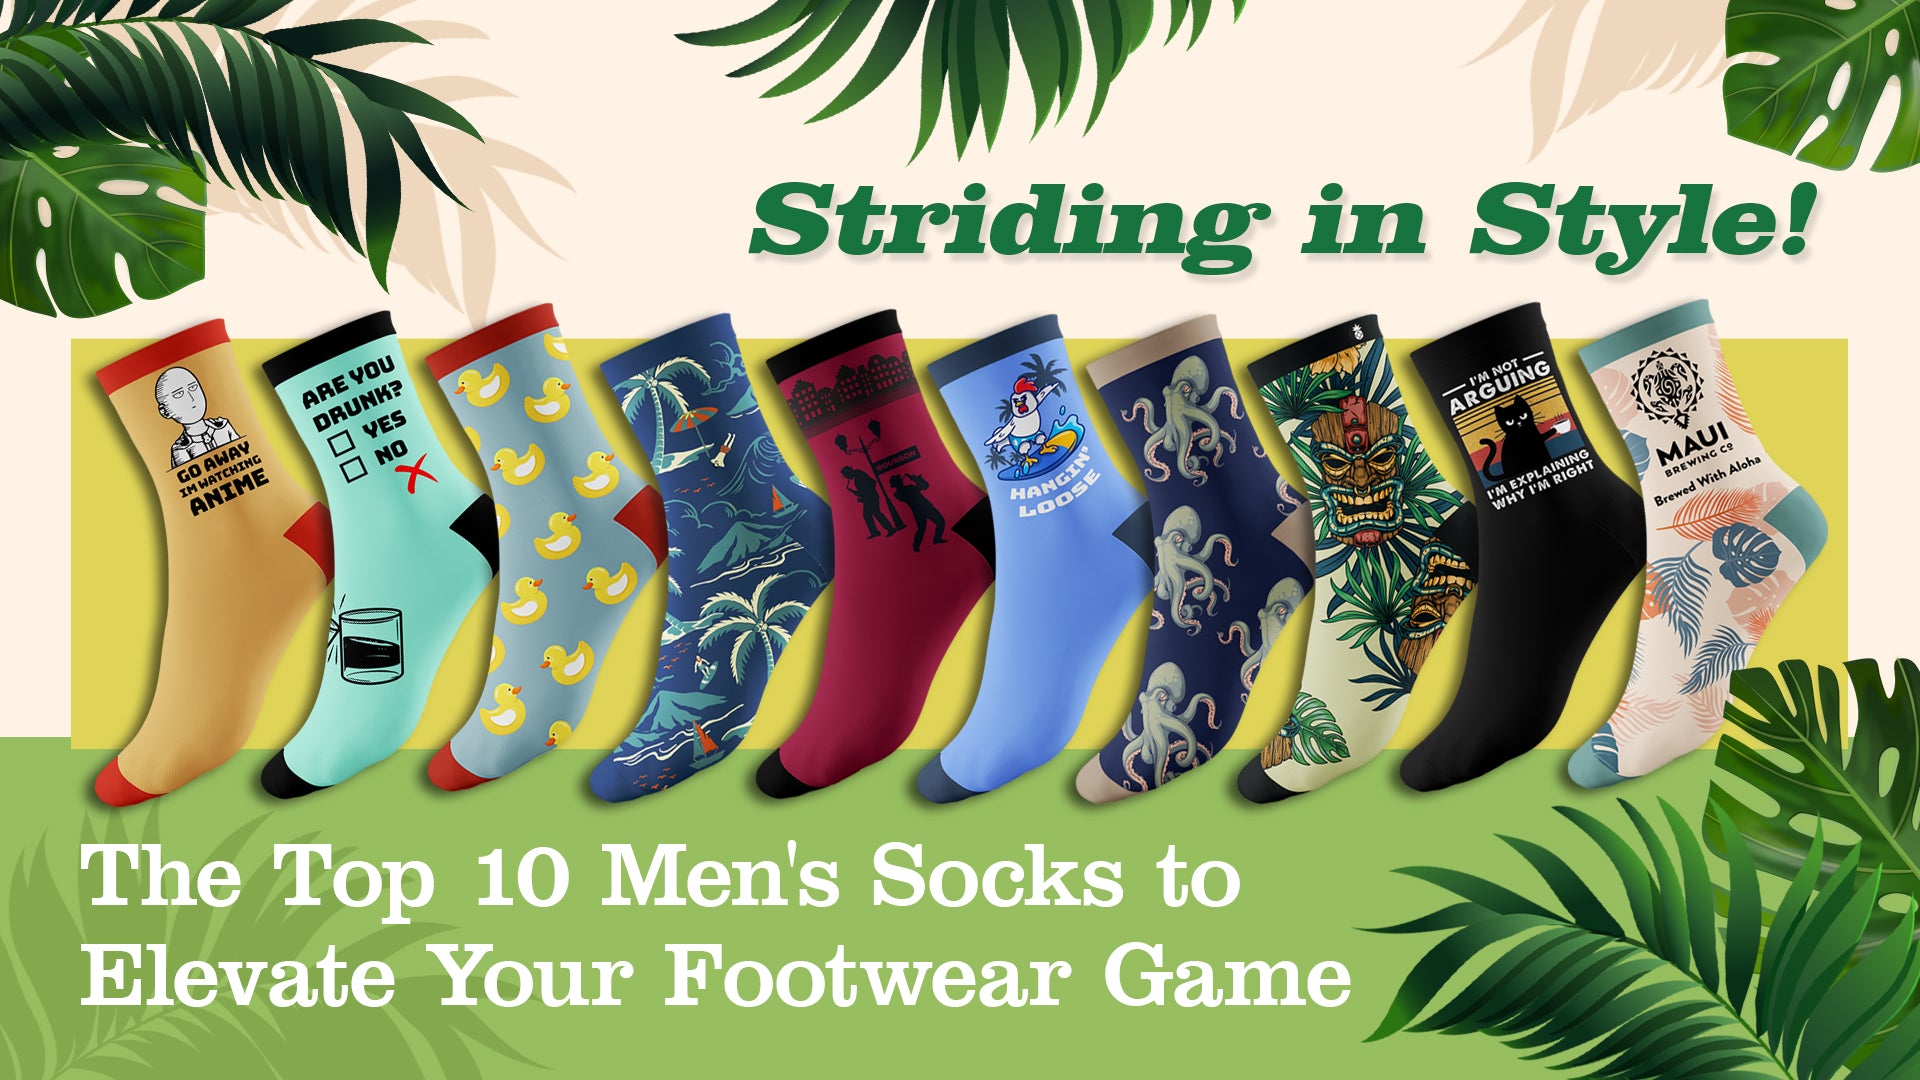 Striding in Style: The Top 10 Men's Socks to Elevate Your Footwear Game